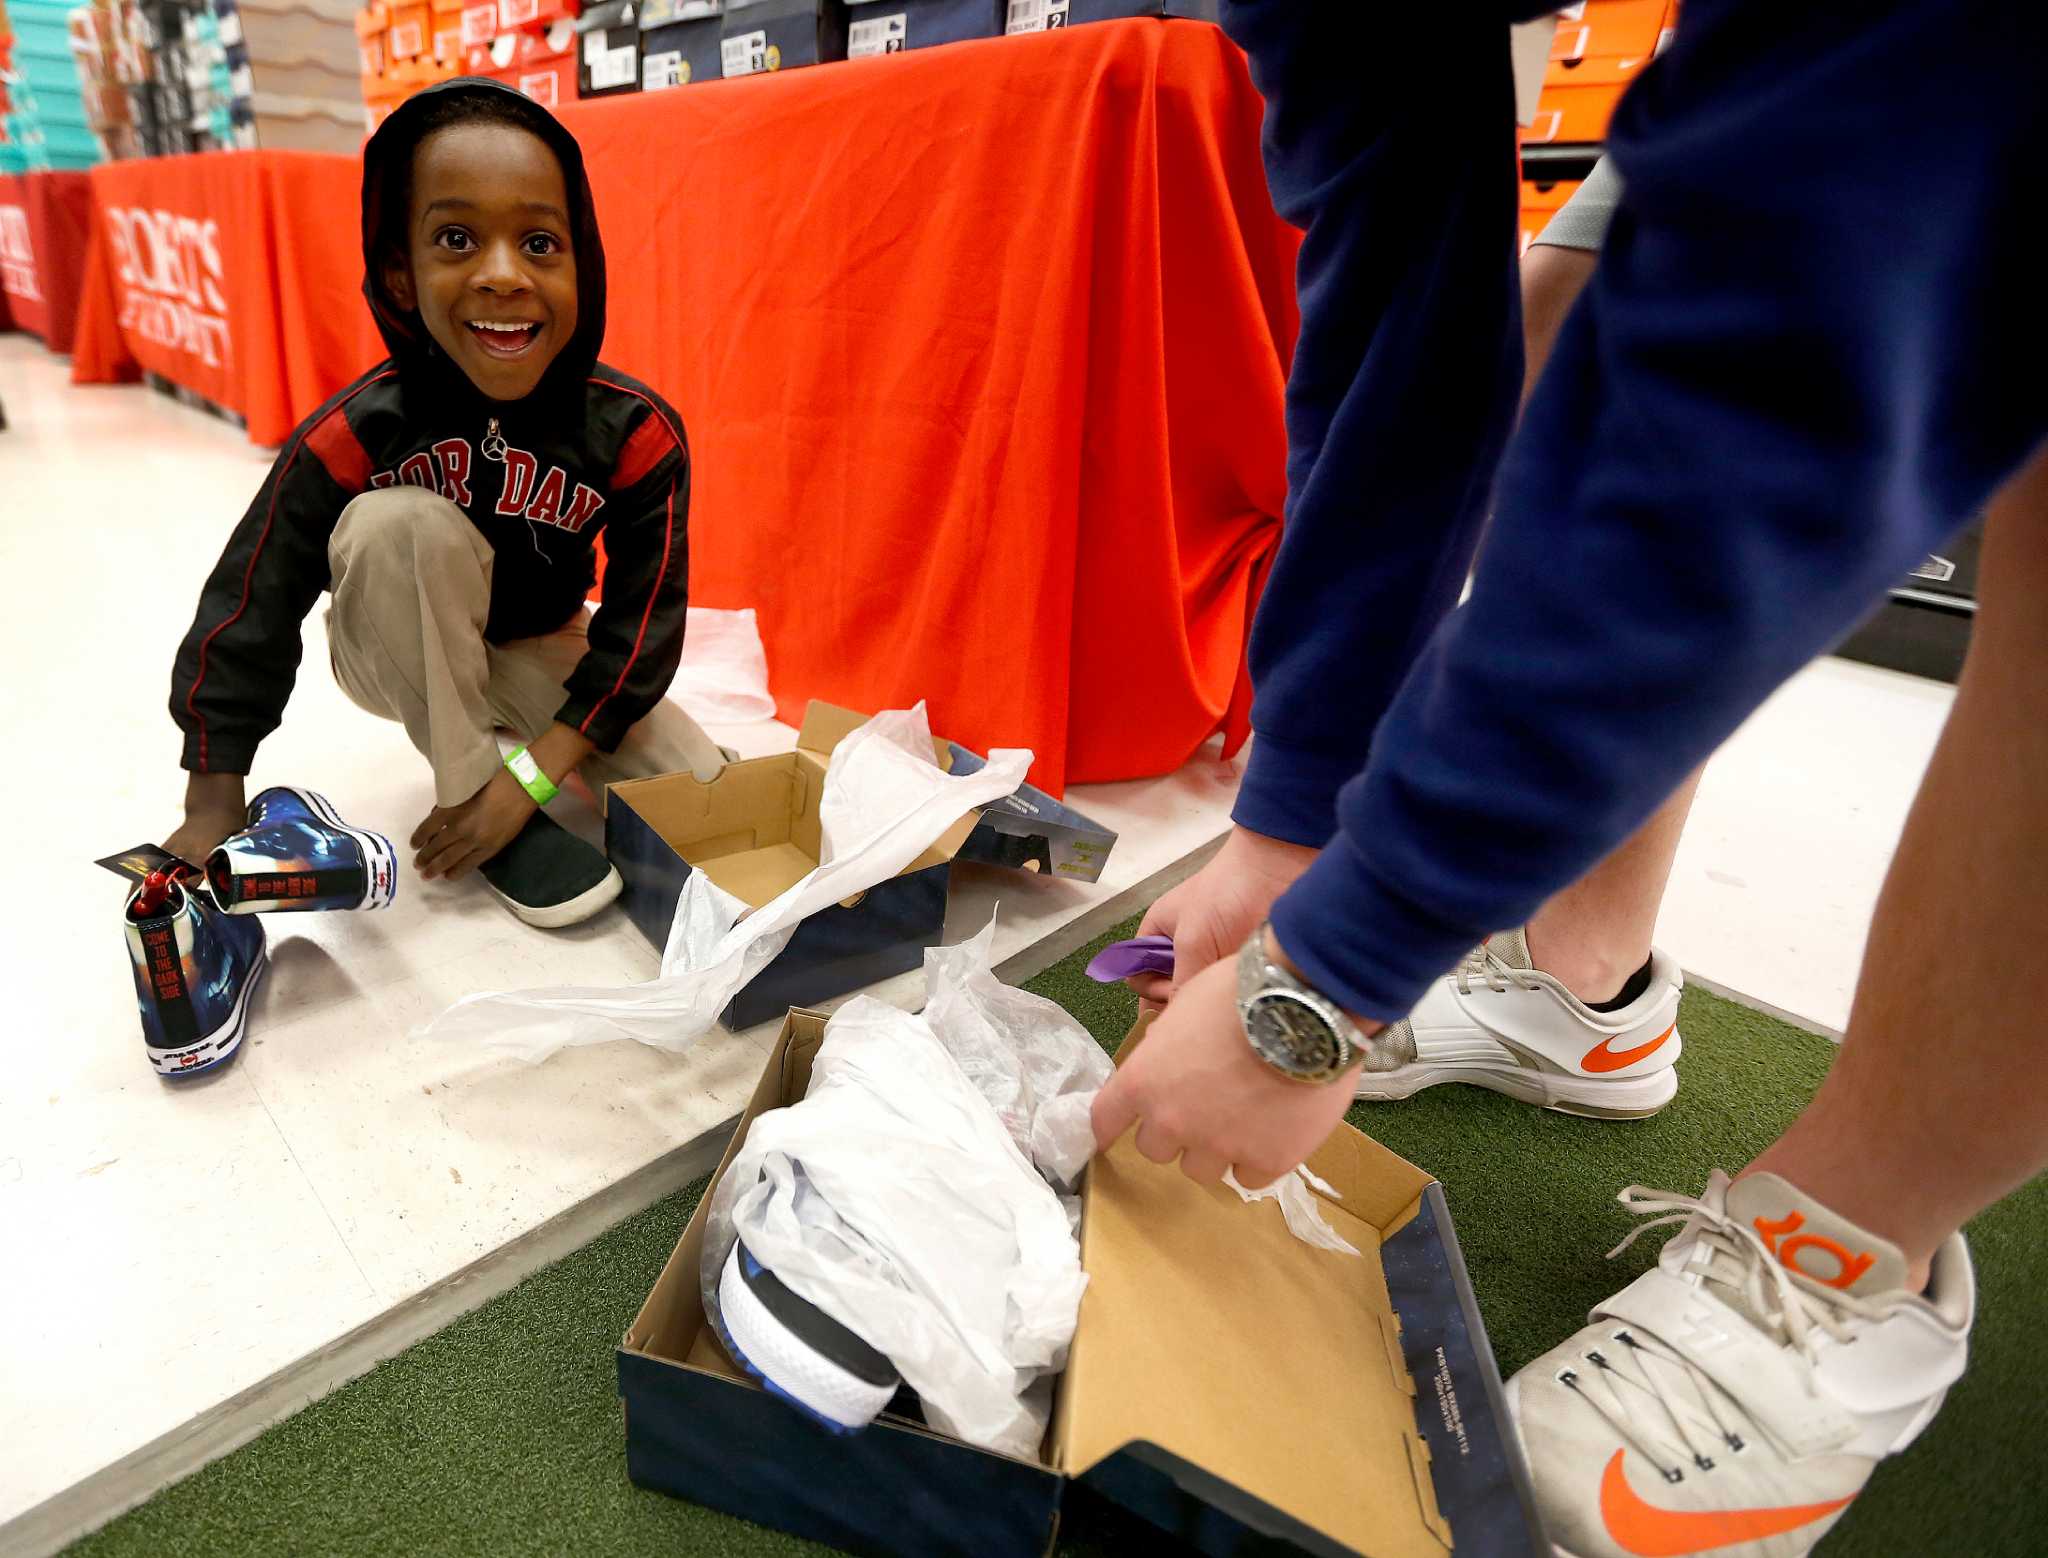 Homeless children start the year with new shoes